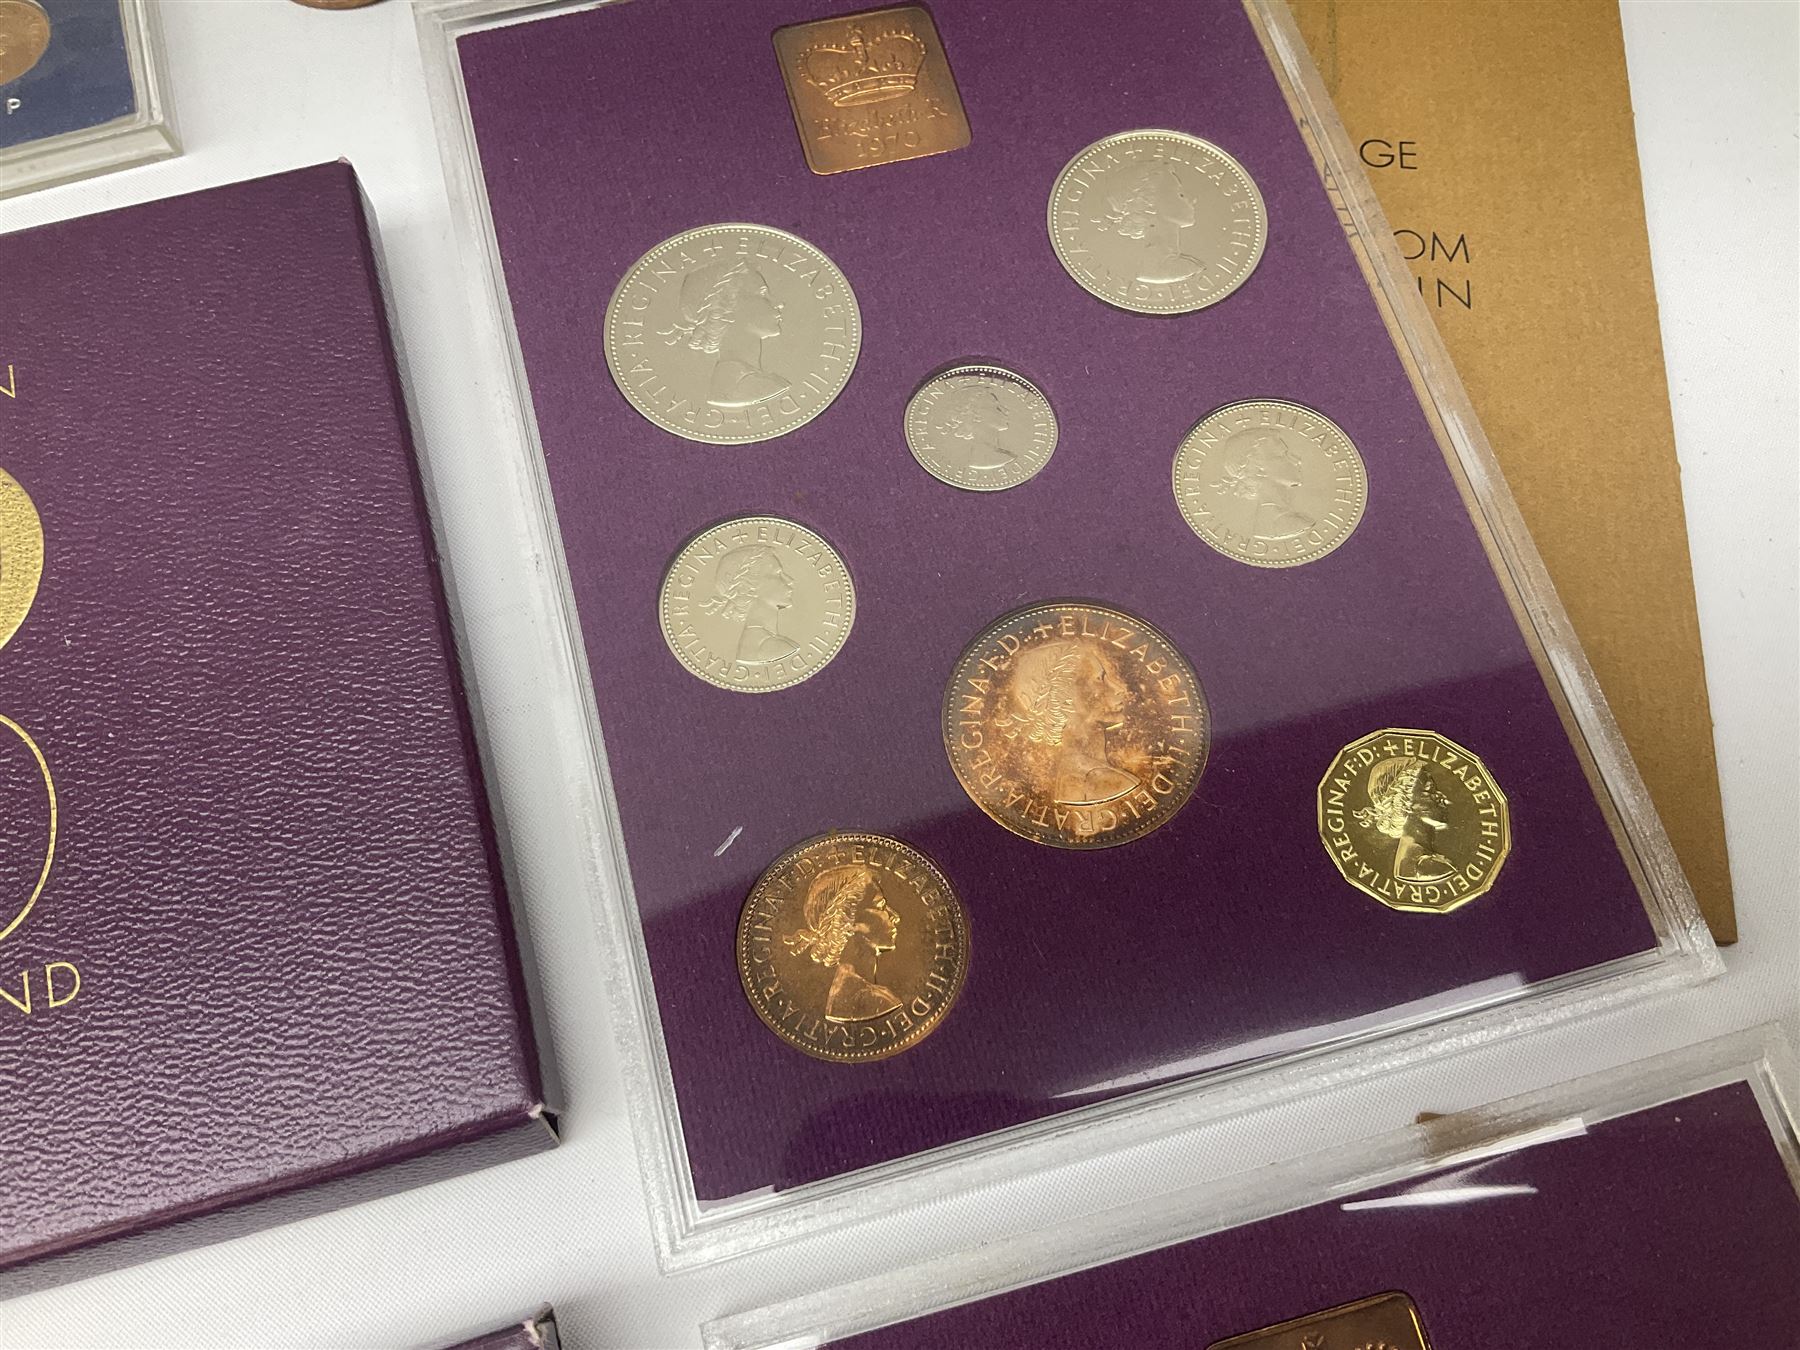 Mostly Great British coins including approximately 40 grams of pre 1920 Great British silver coins - Image 10 of 11